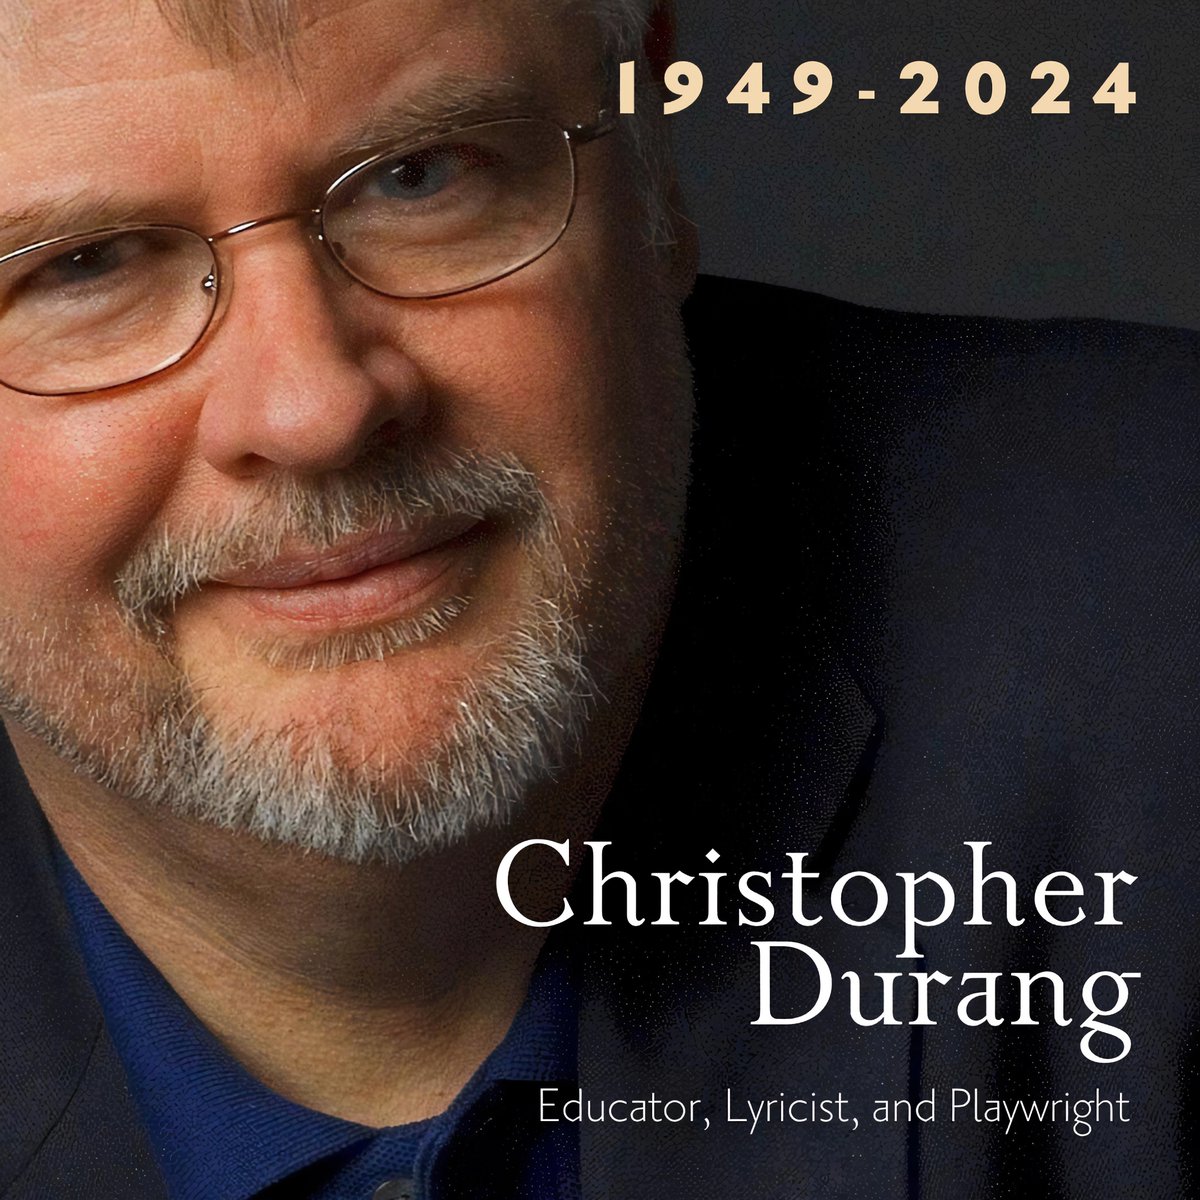 Christopher Durang was not only a giant in our field, but a guiding light whose daring works illuminated the stage with brilliance and wit. His legacy as a playwright, lyricist, and educator is immeasurable, touching the lives of countless artists and audiences alike. As we…